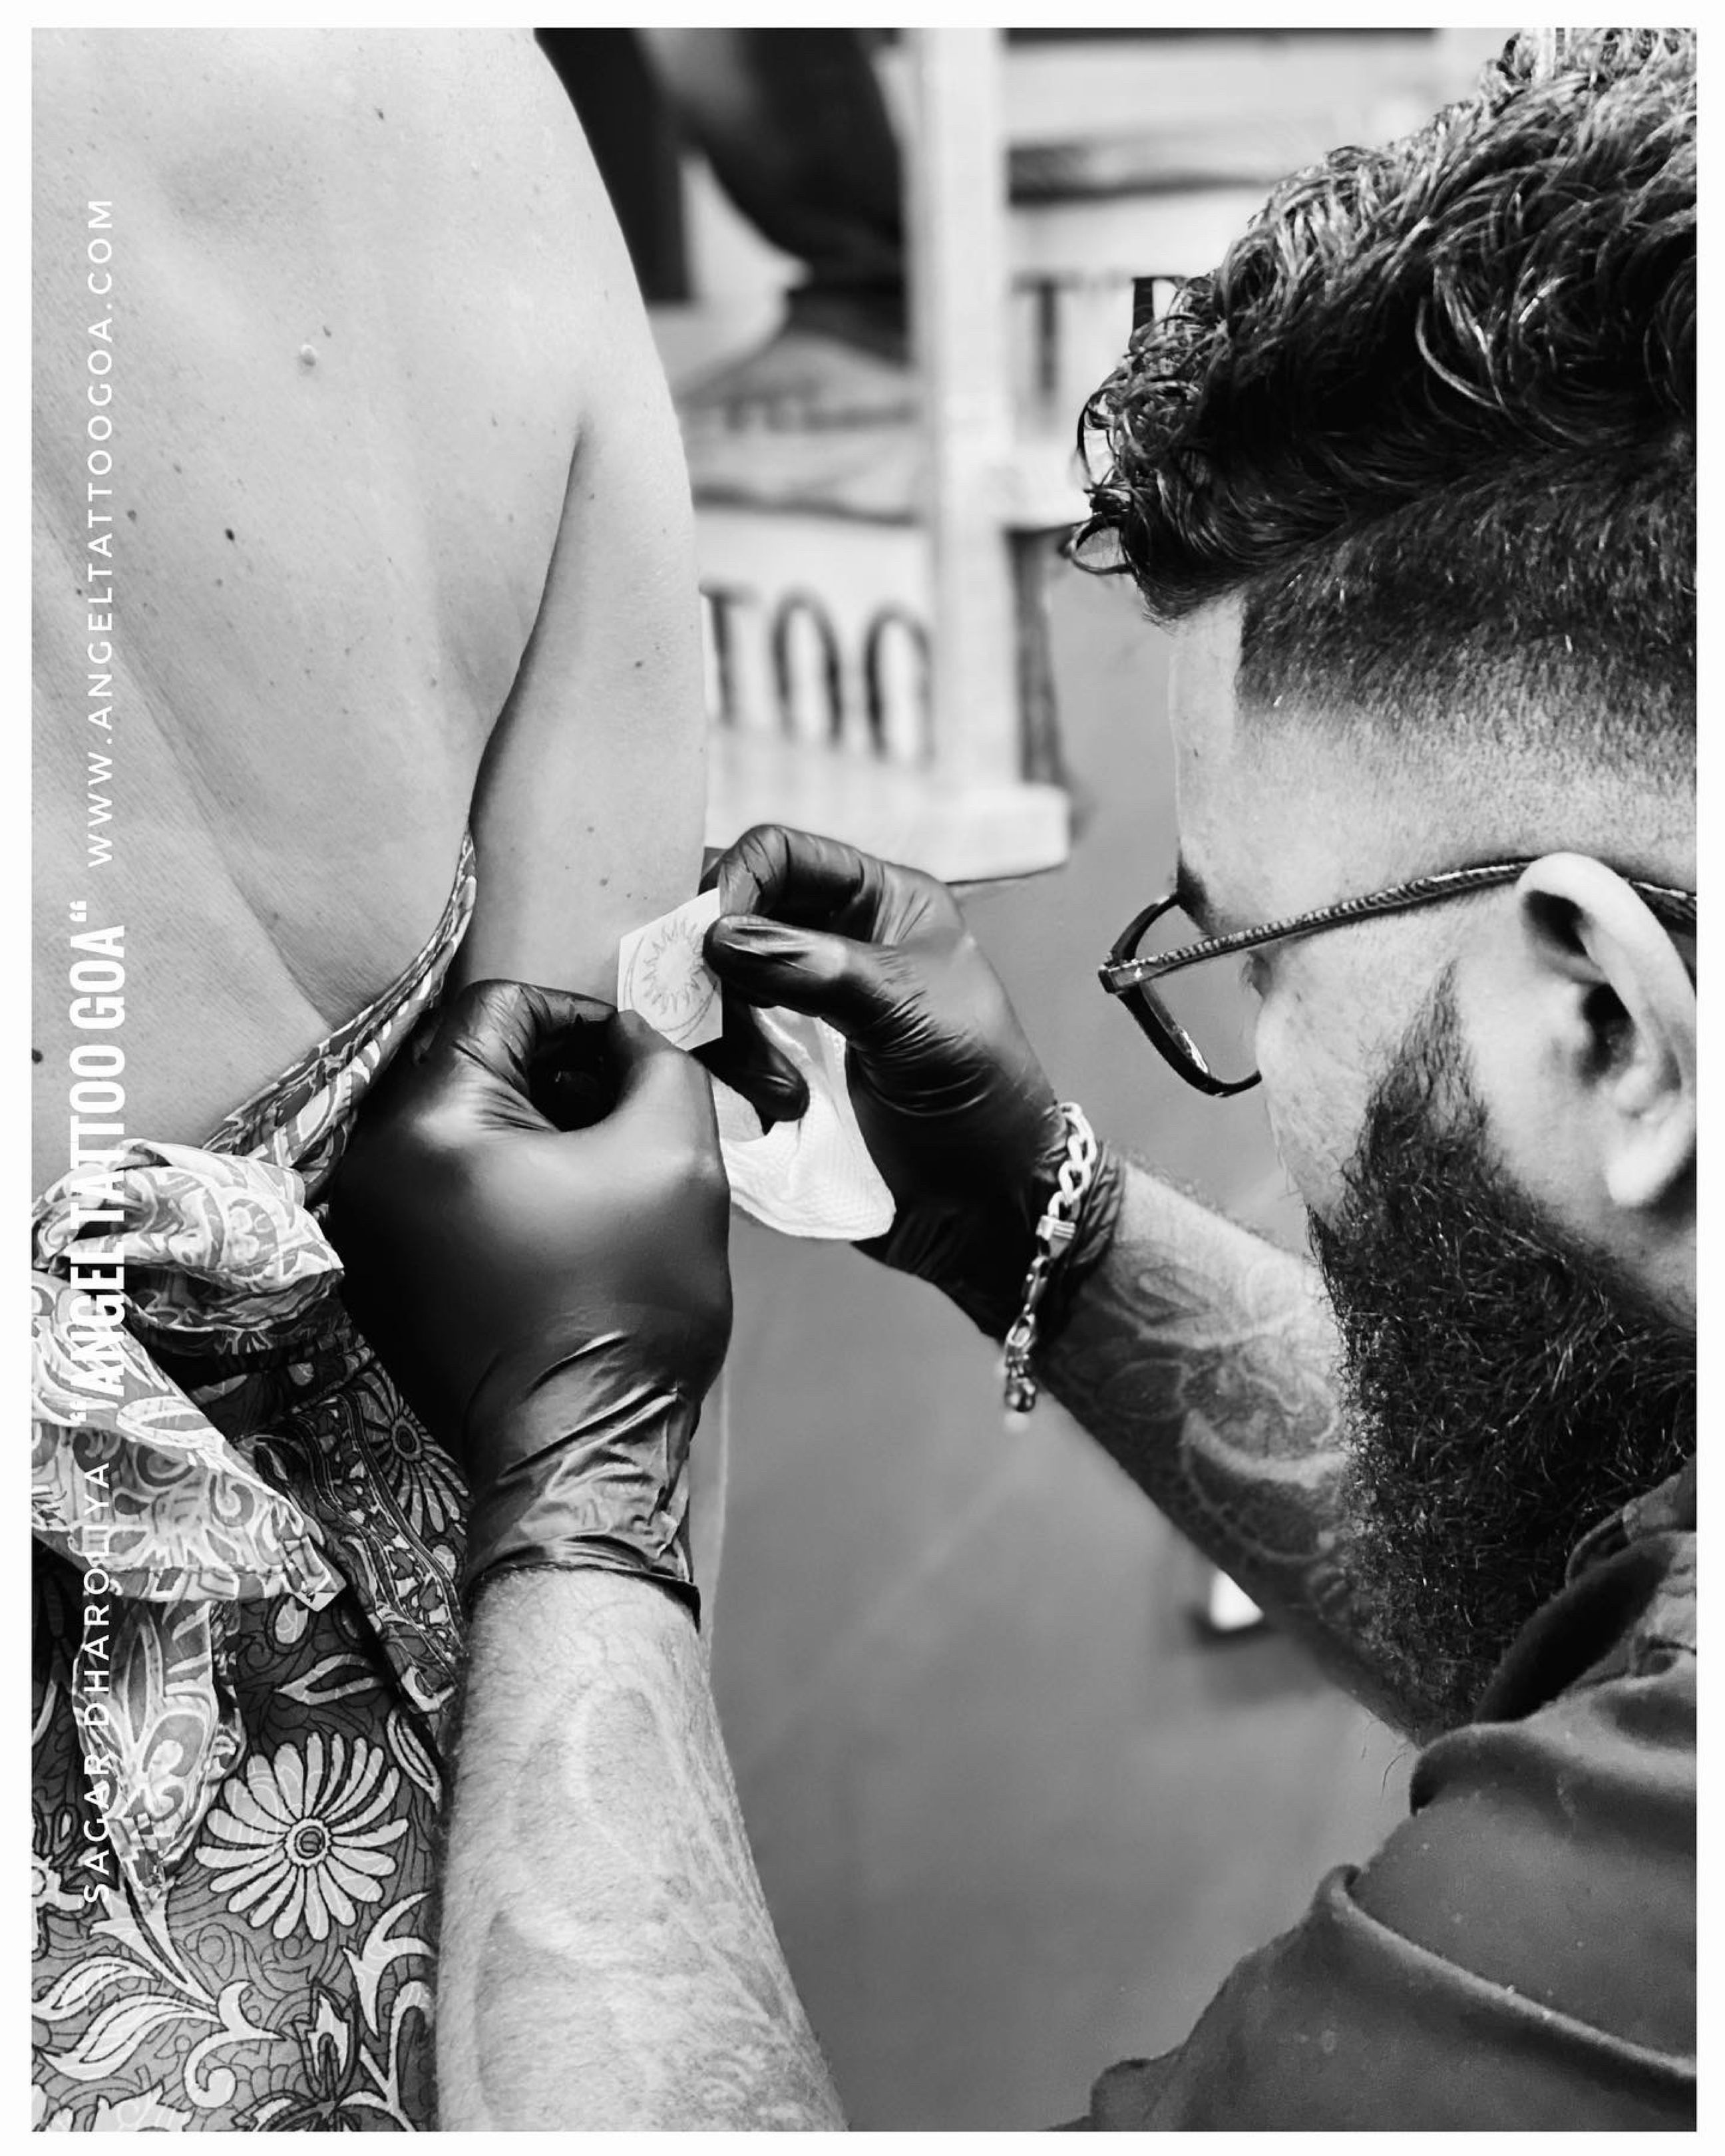 In Goa and Wanna Get Inked? Check Out These 5 Tattoo Artists In North Goa.  | WhatsHot Mumbai